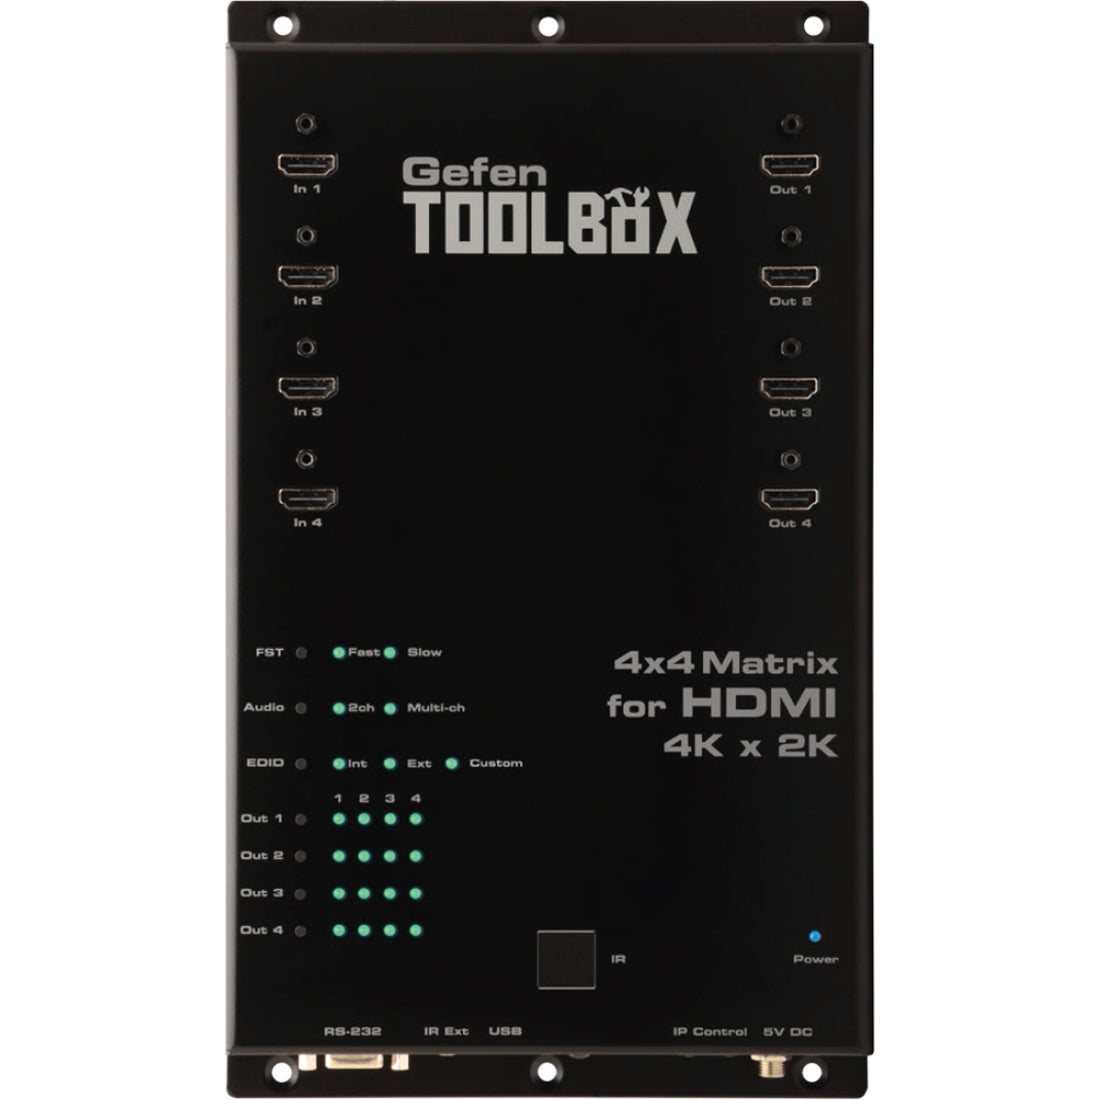 Gefen GTB-HD4K2K-444-BLK 4x4 Matrix for HDMI with Ultra HD 4K x 2K Support, USB, HDMI In/Out, Serial Port, RJ-45 Connectivity